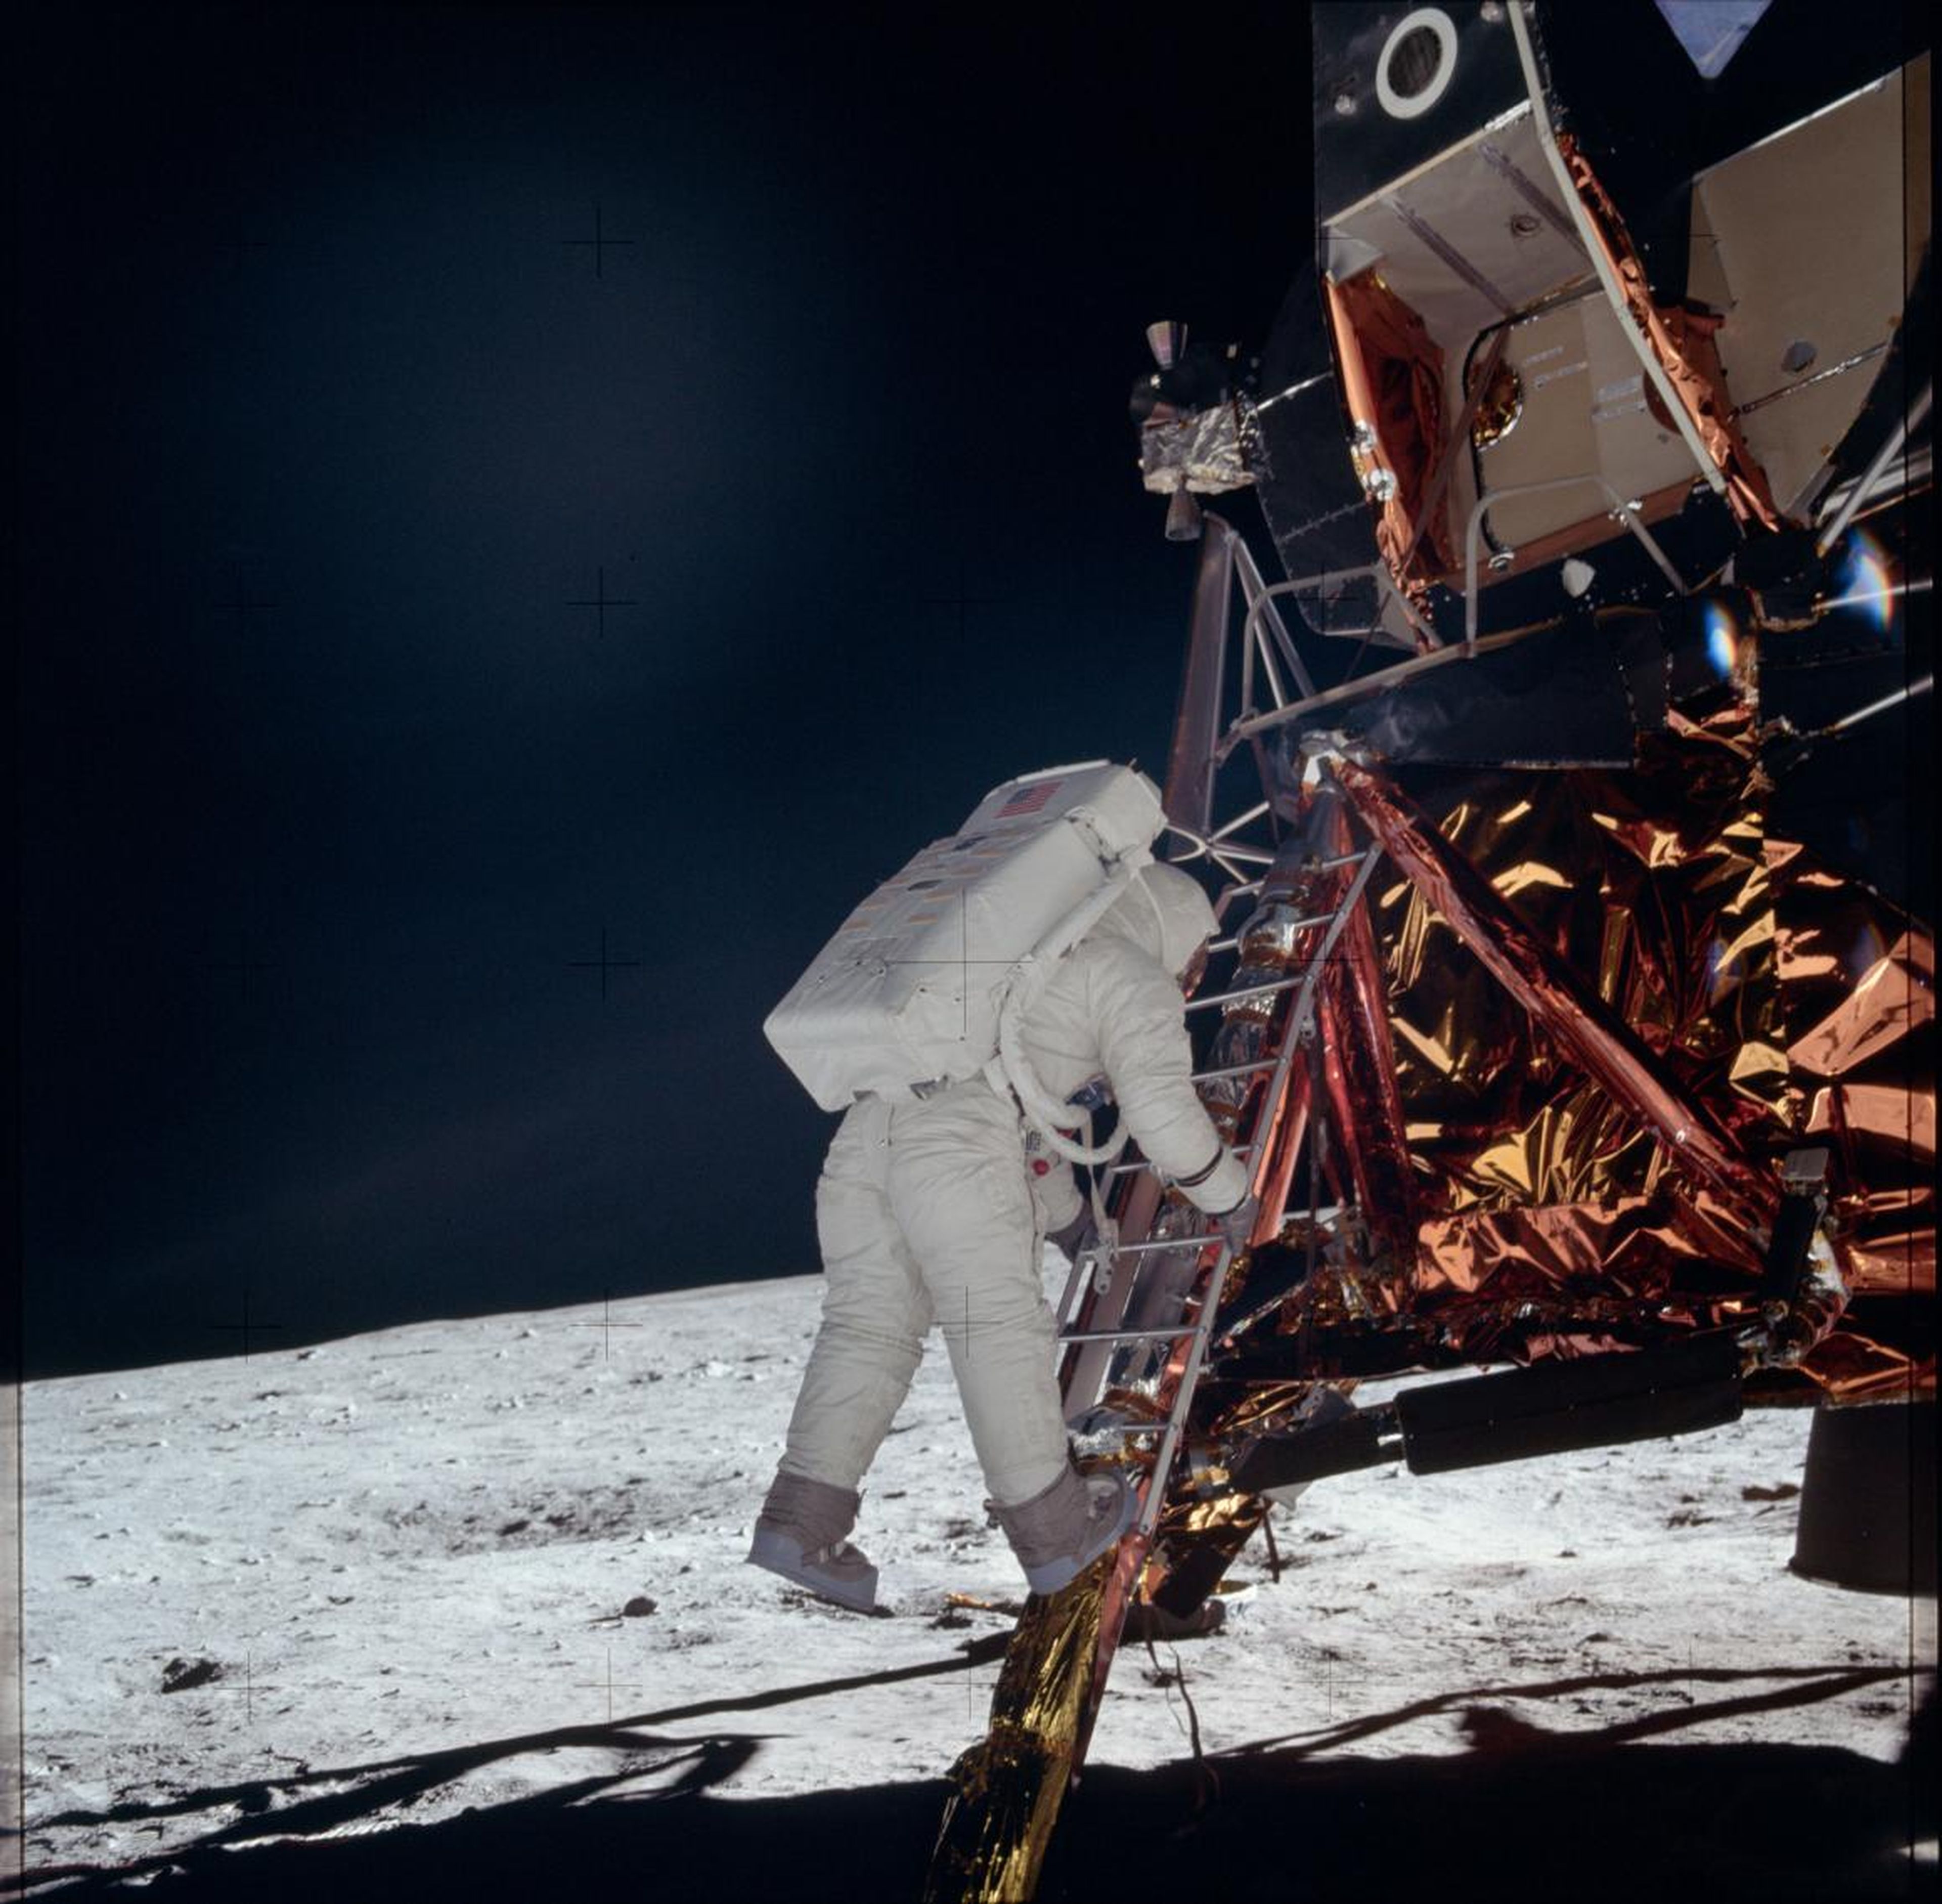 Apollo 11 put people on the lunar surface for the first time on July 20, 1969. The world watched live on TV.